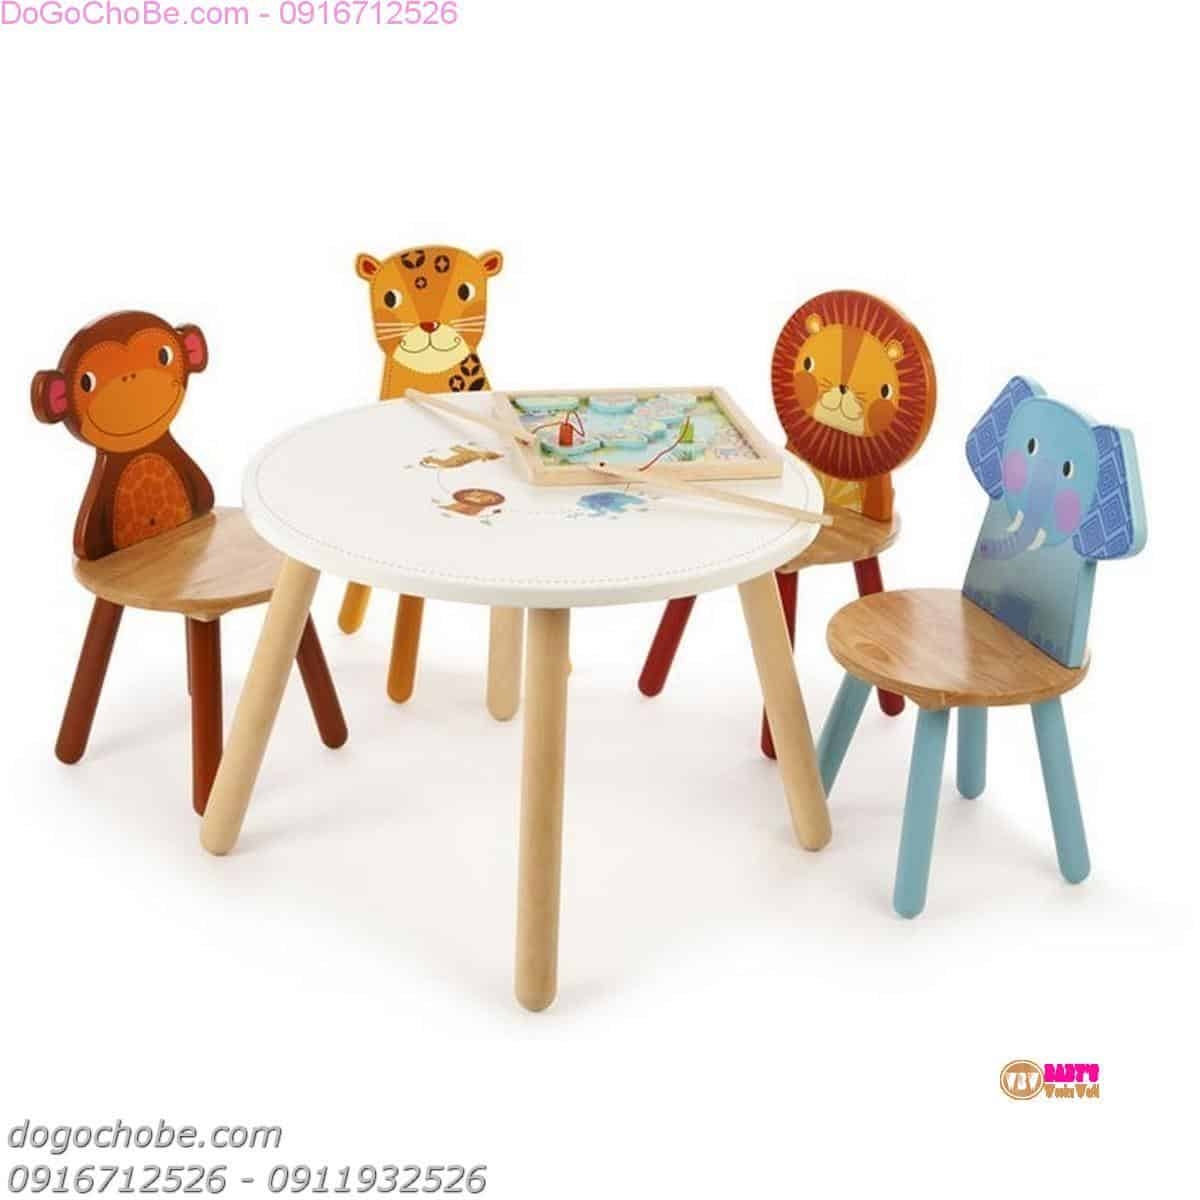 playskool table and chairs